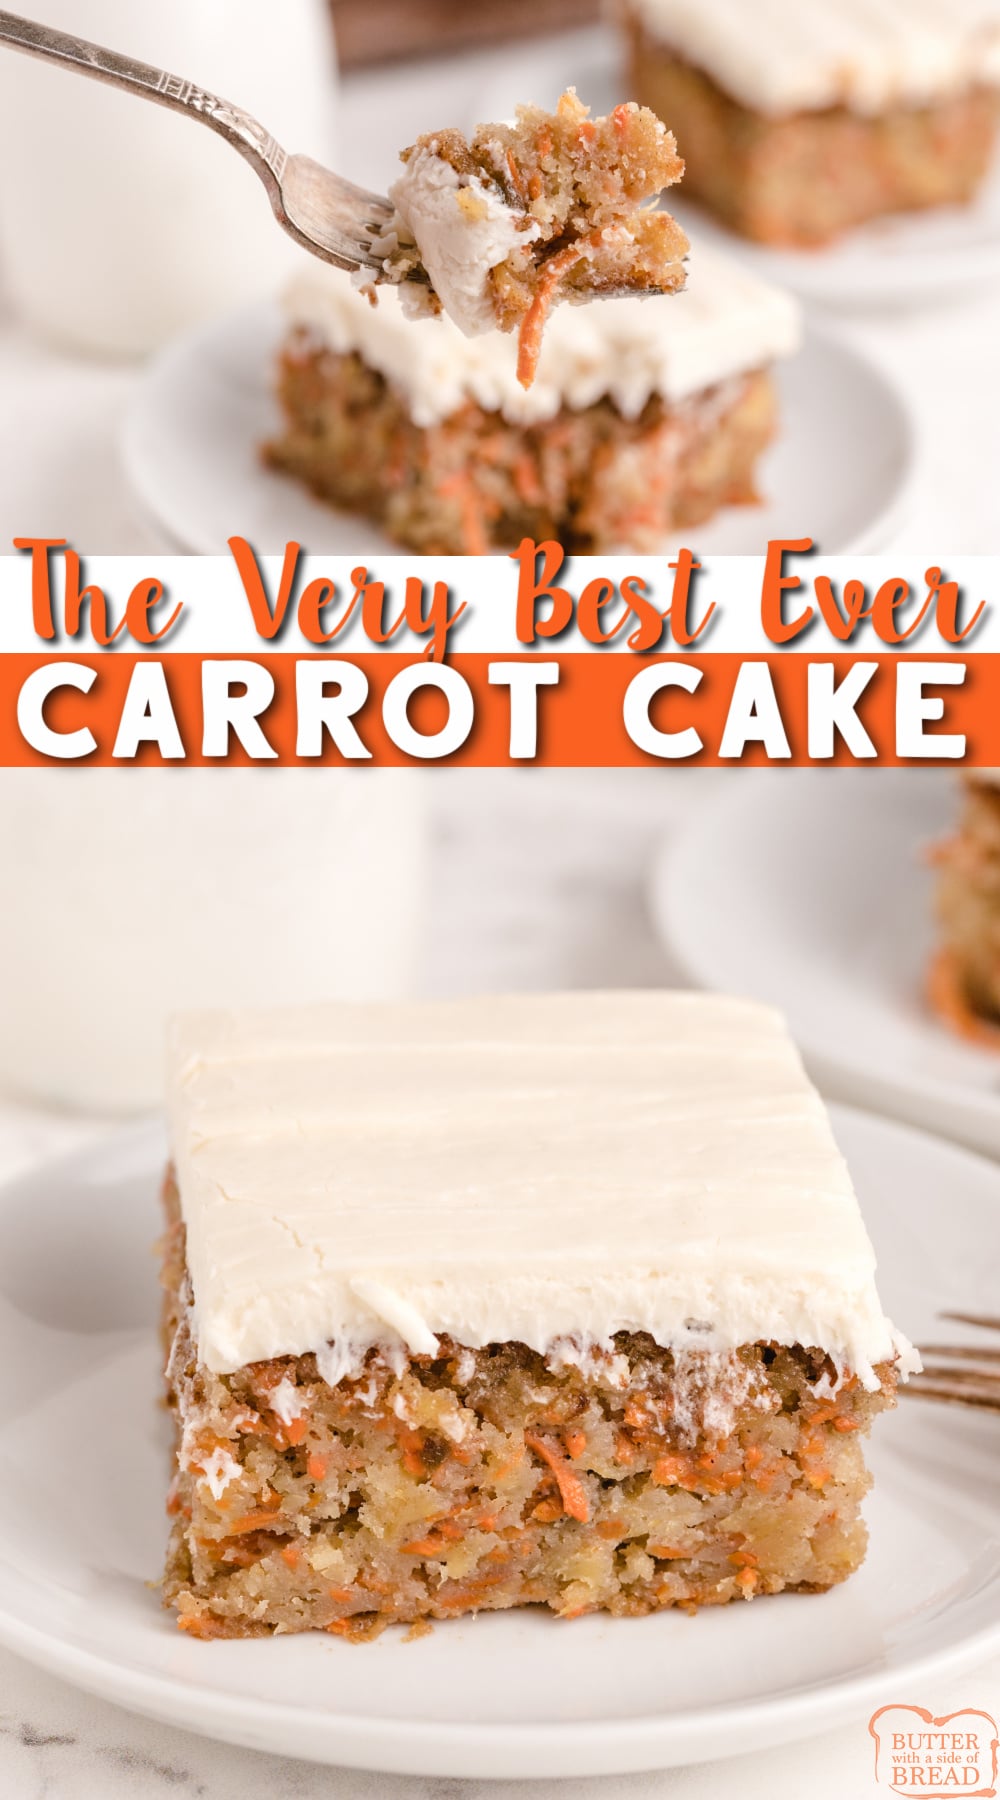 Best Carrot Cake recipe that is moist, delicious and made with crushed pineapple and shredded carrots. The homemade cream cheese frosting pairs perfectly with this carrot cake recipe.